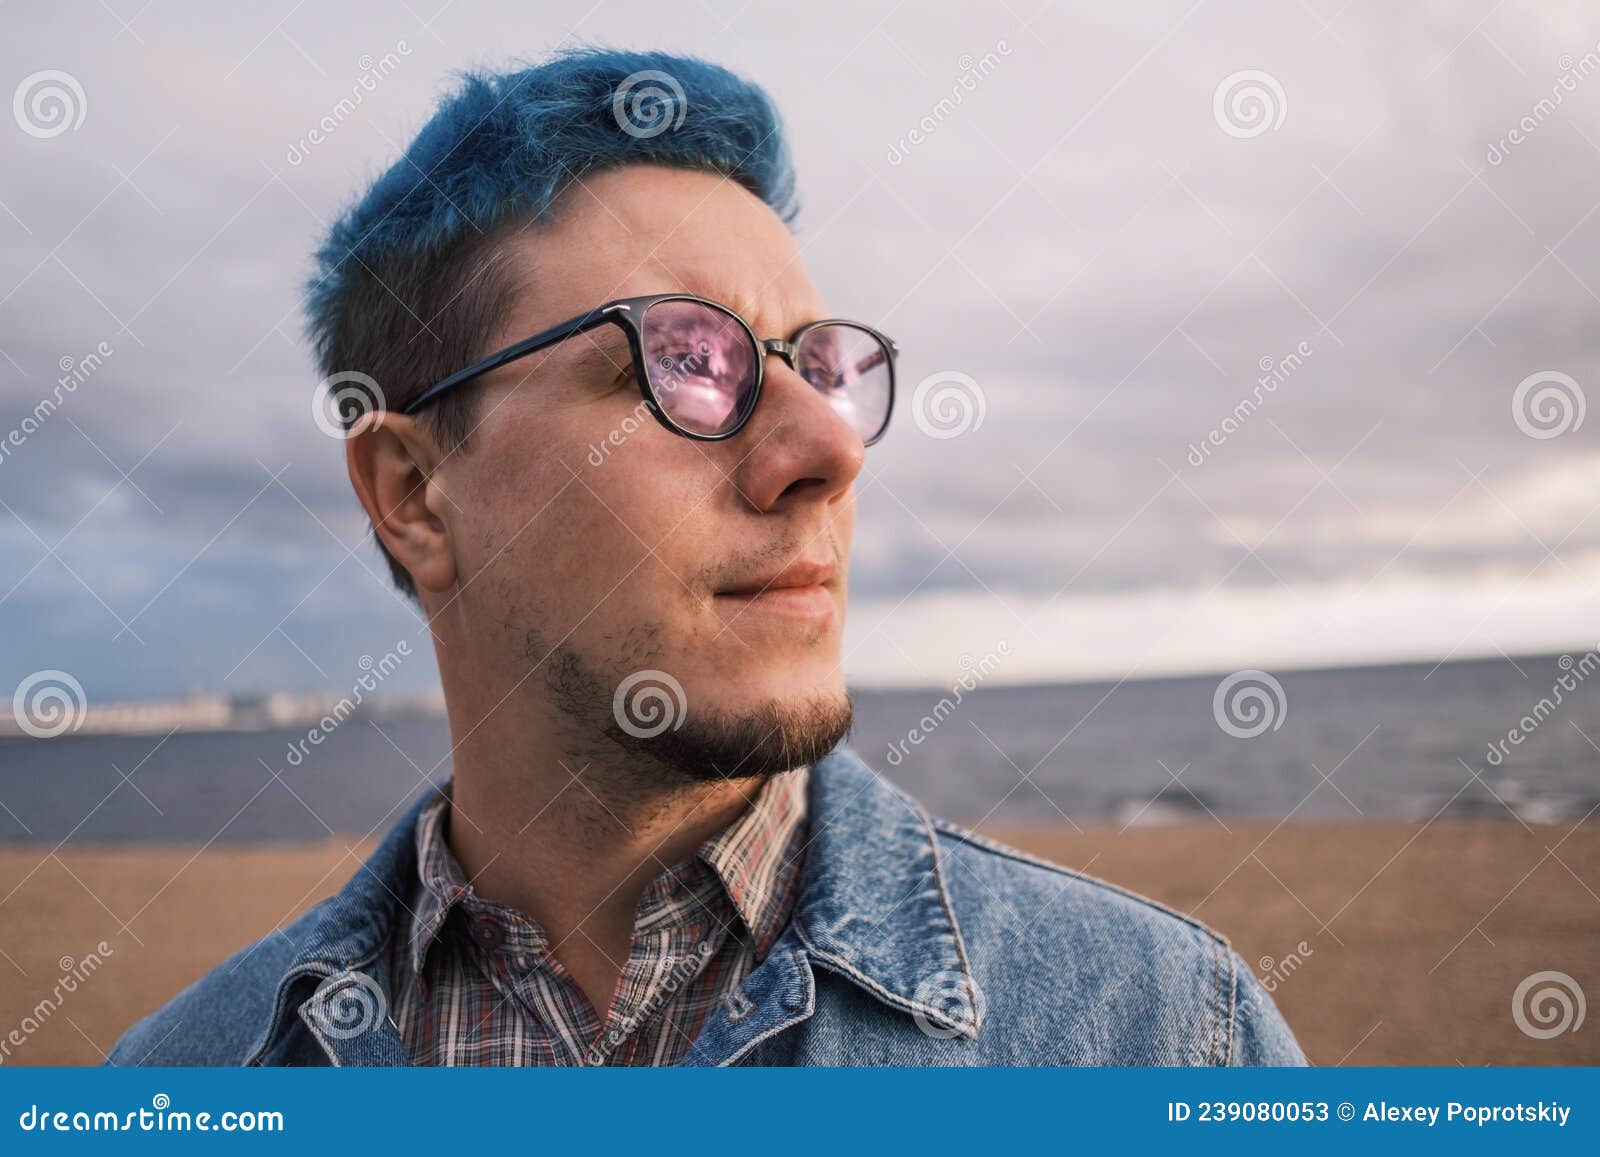 7. Teenager with dark blue hair and glasses - wide 2